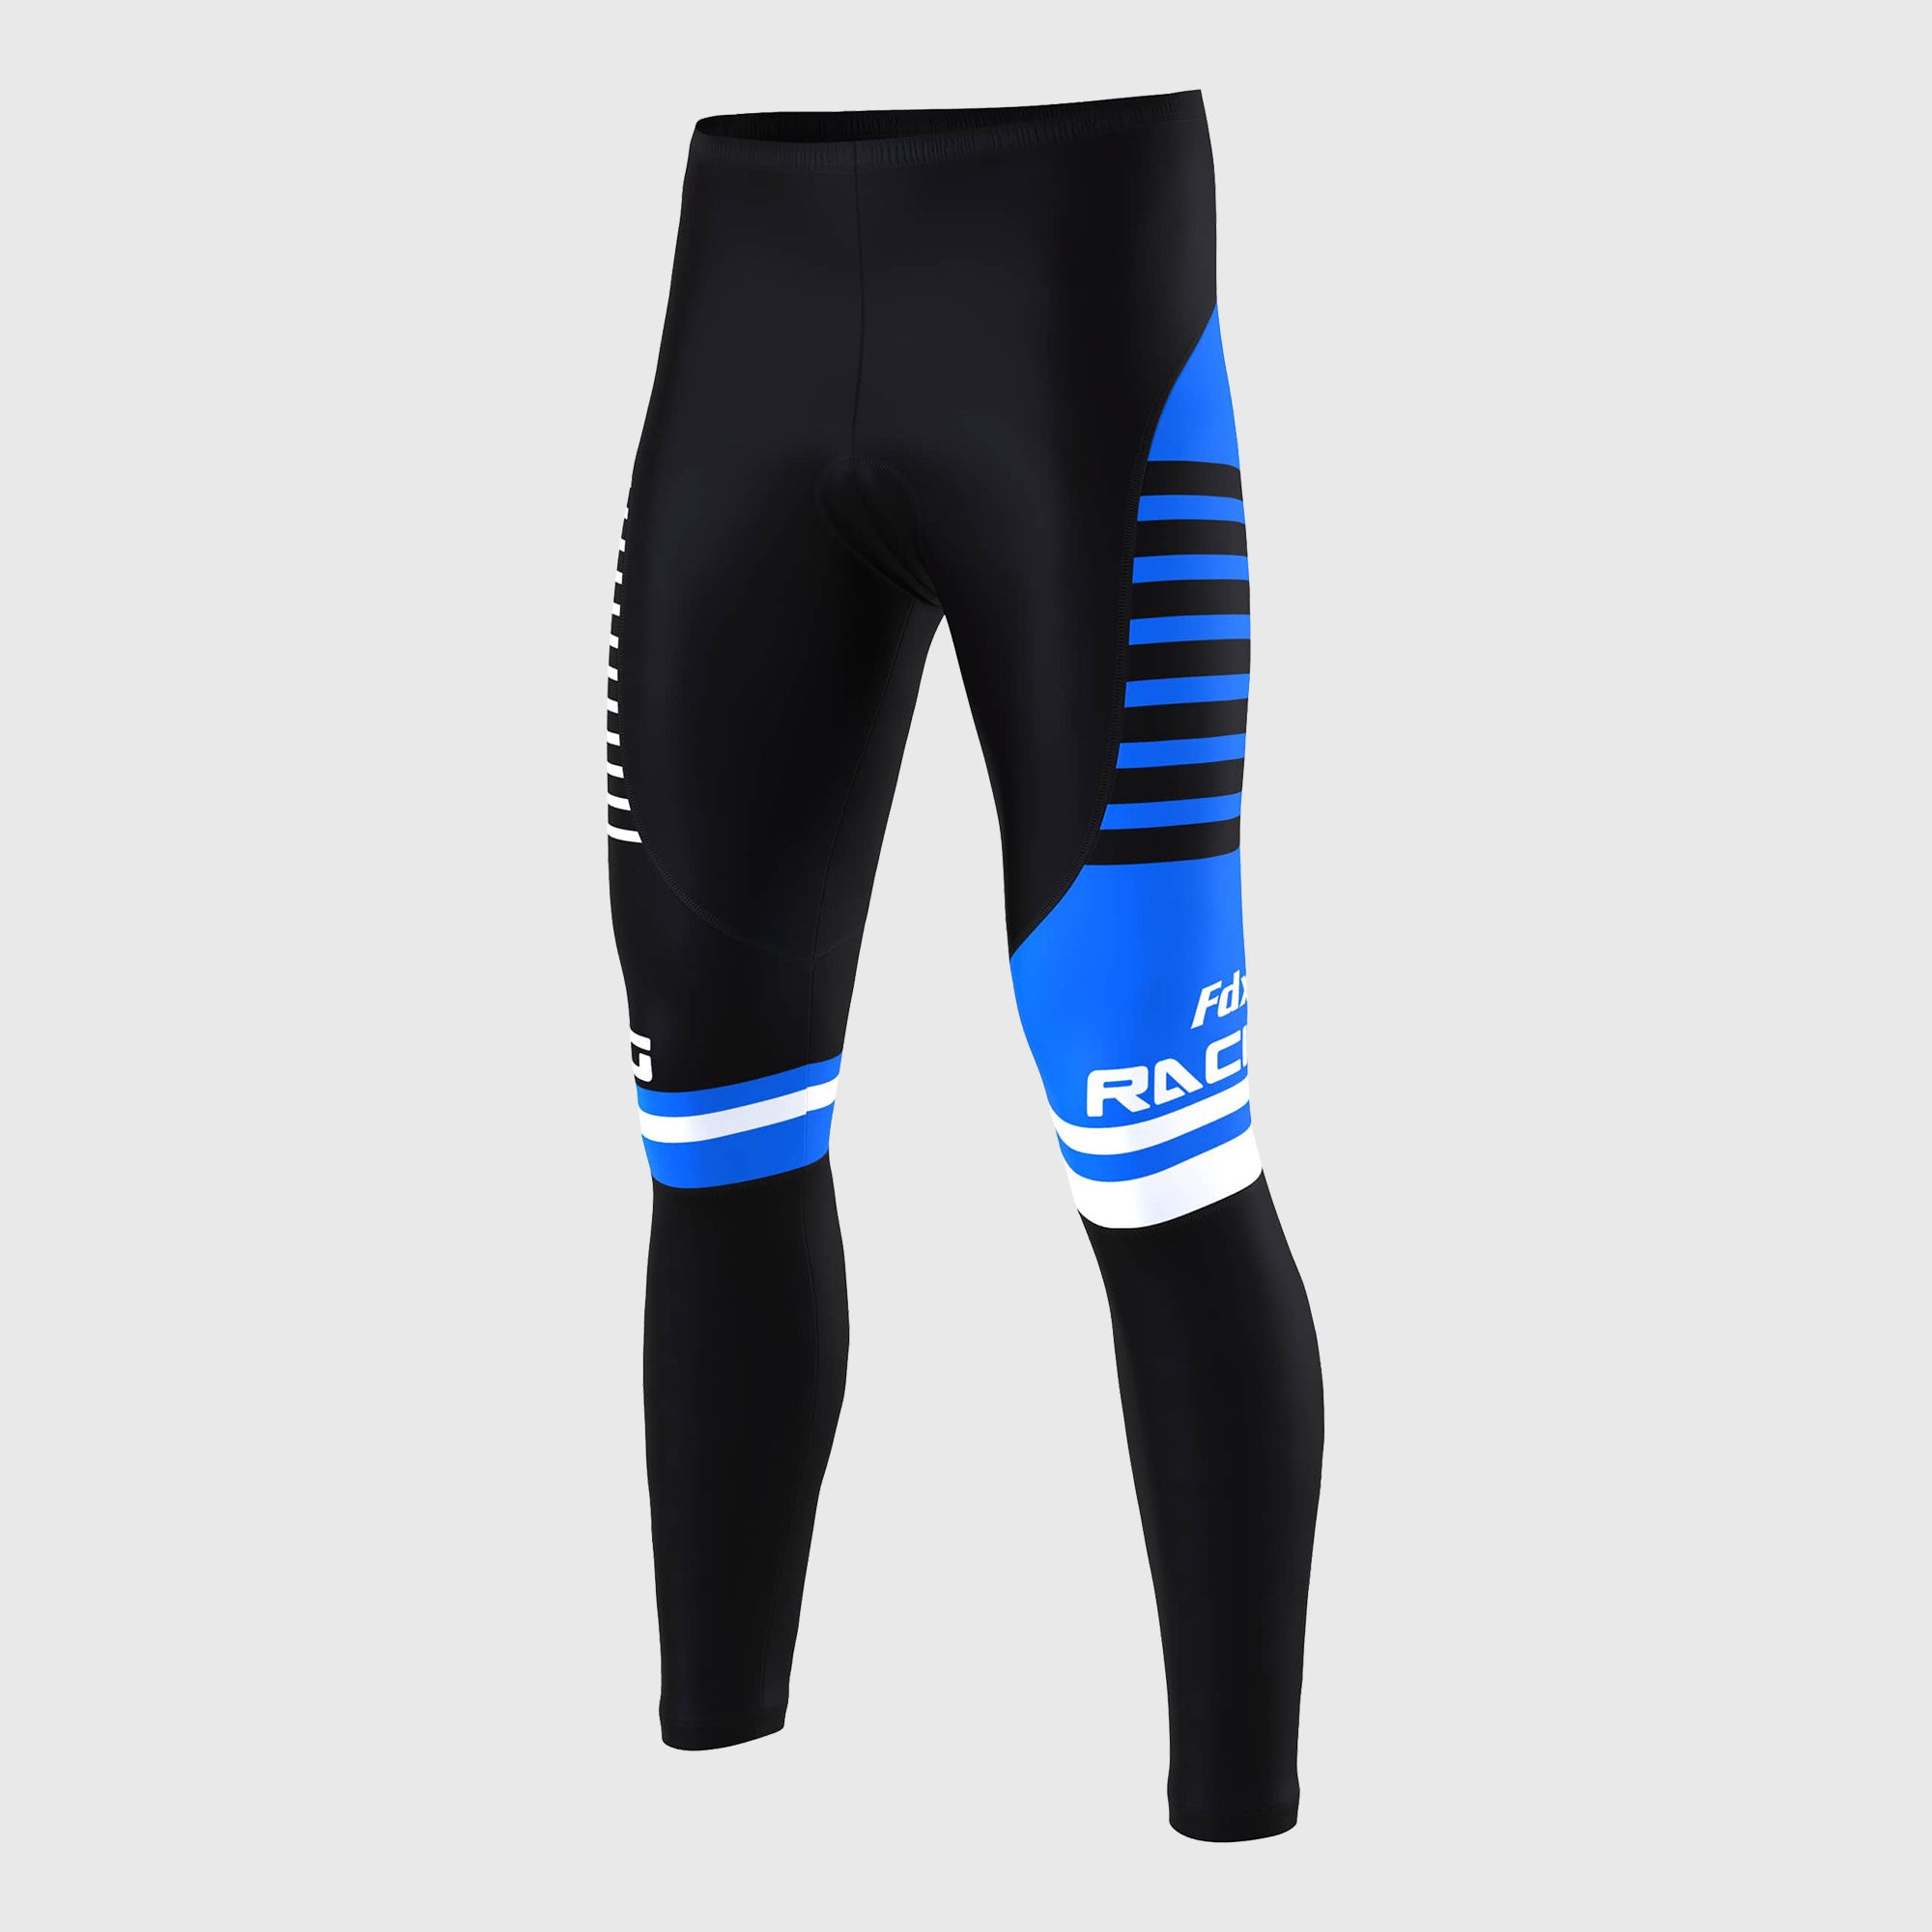 Fdx Blaze Men's Blue Thermal Padded Cycling Tights